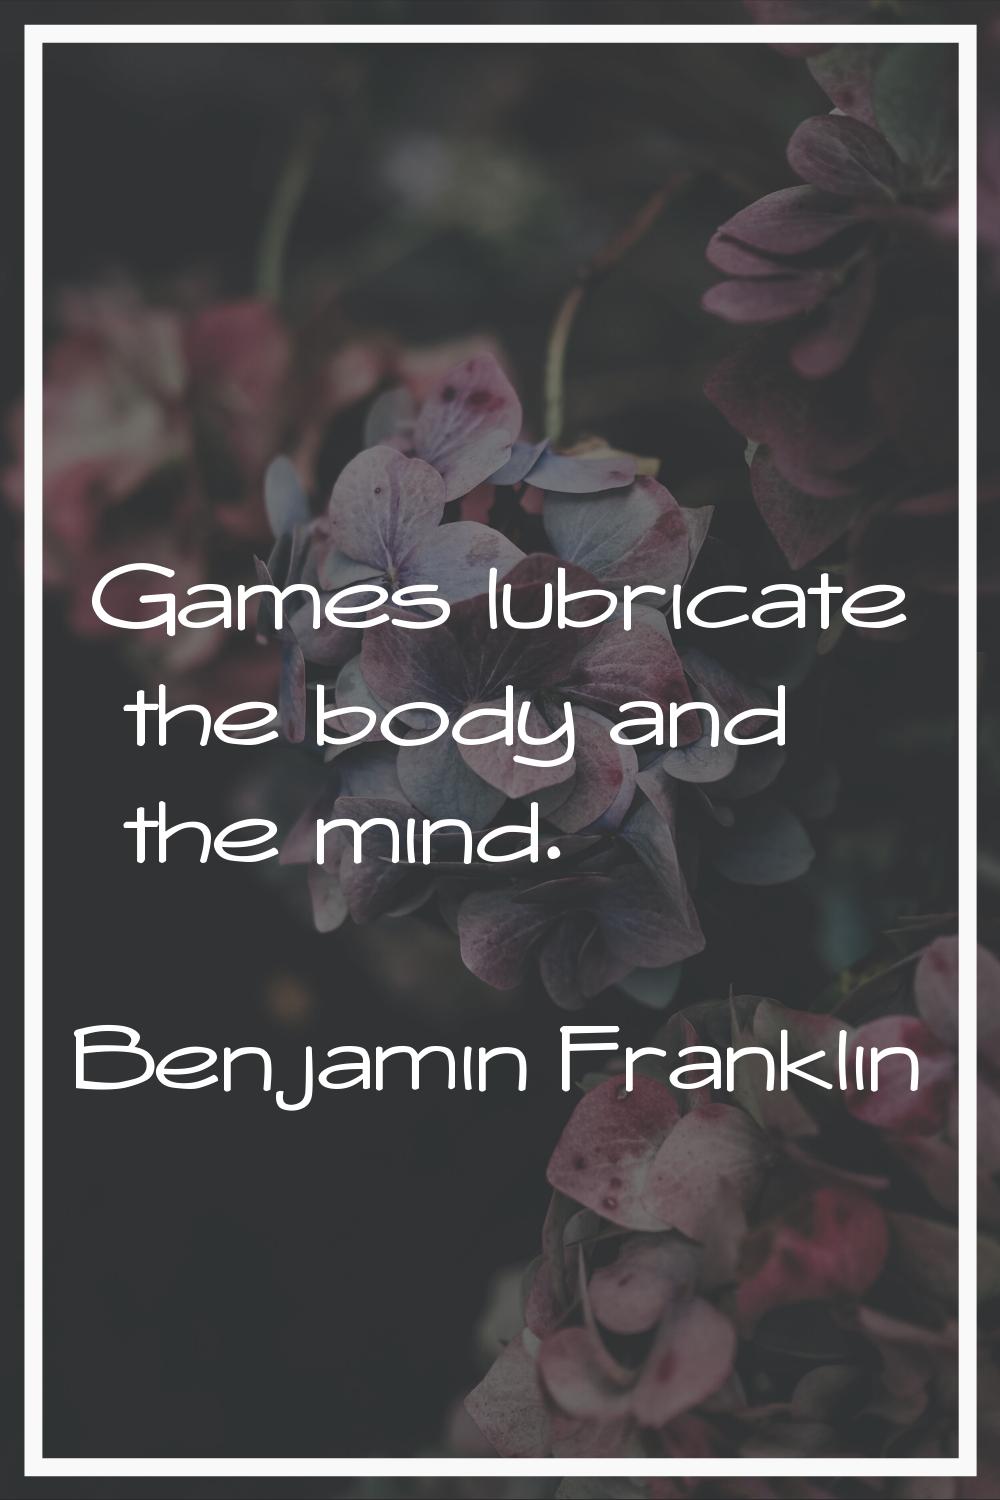 Games lubricate the body and the mind.